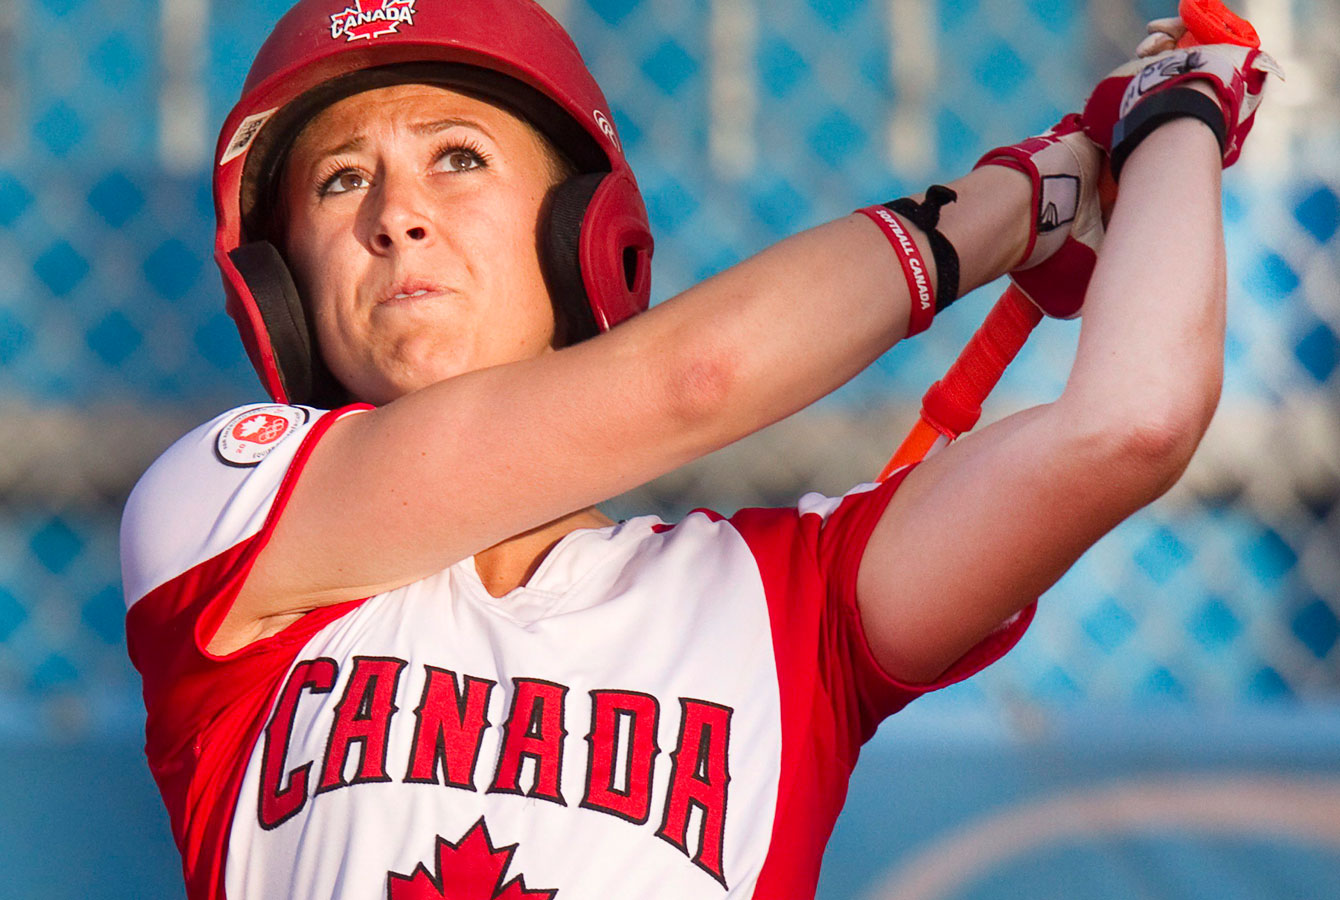 Canada's Erika Polidori hits a ball to left field to drive in a run at TO2015